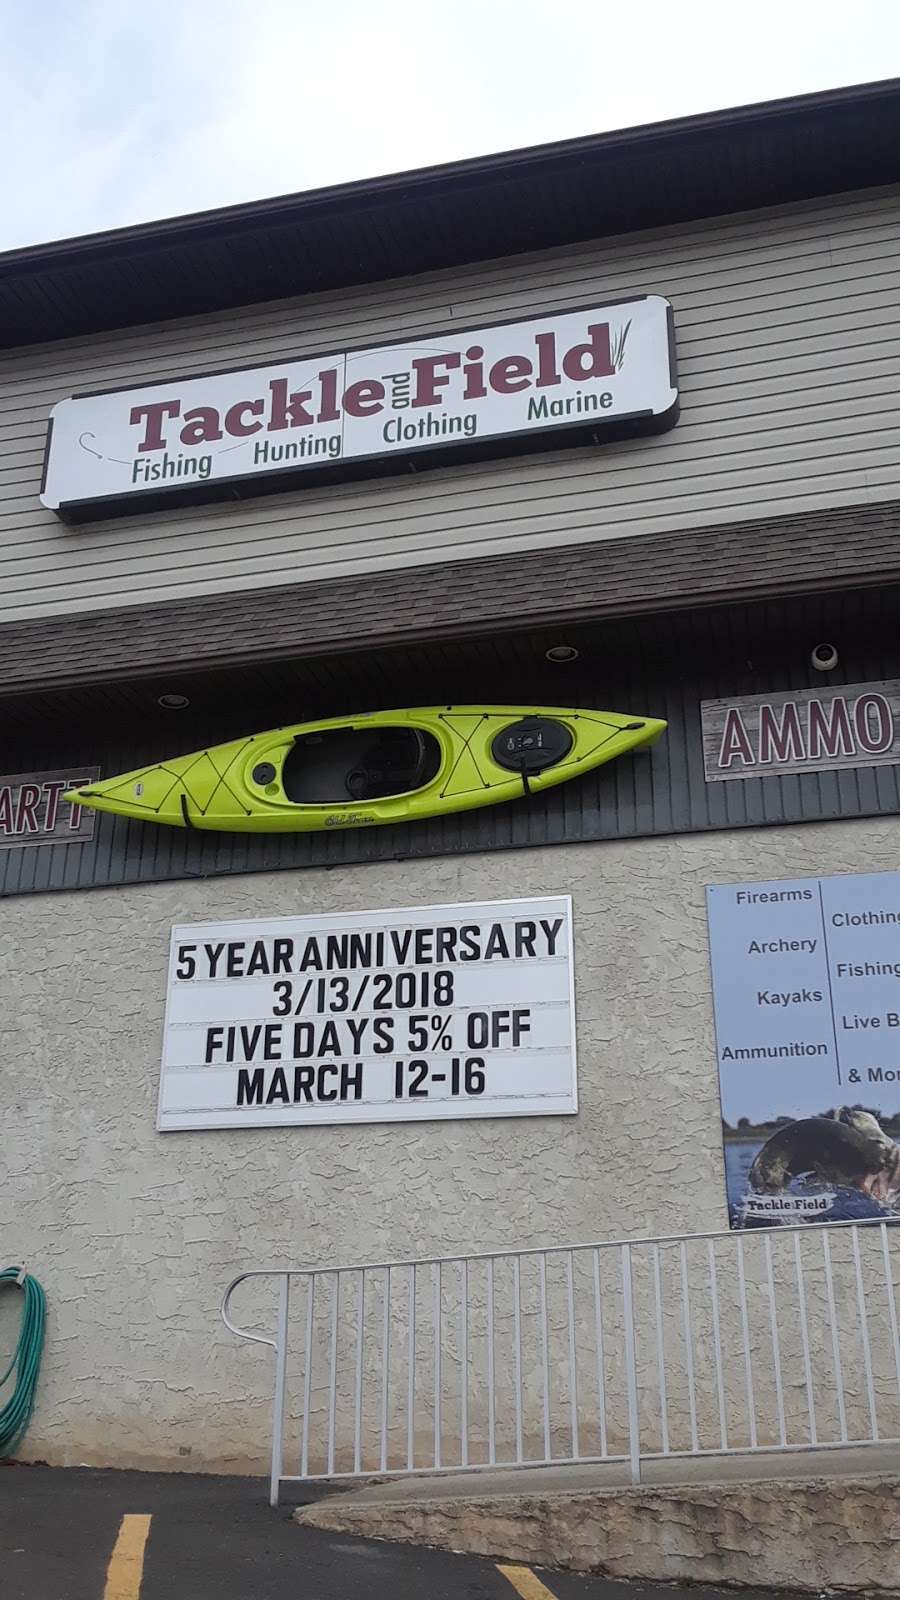 Tackle and Field | 81 Ringwood Ave, Wanaque, NJ 07465, USA | Phone: (973) 835-2966